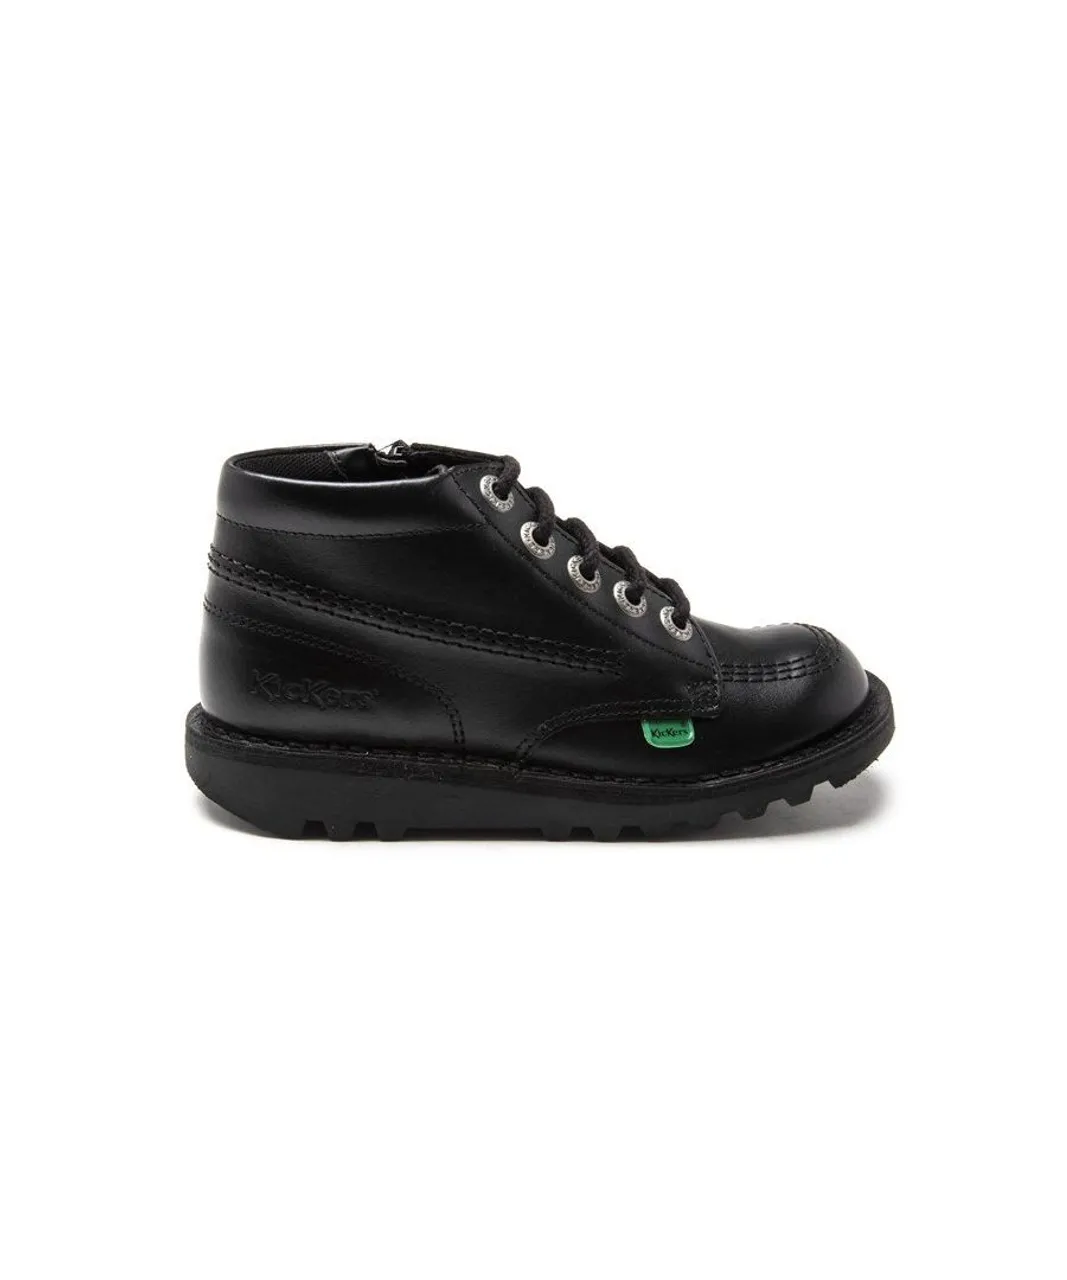 Kickers Childrens Unisex Kick Hi Zip Shoes - Black Leather (archived)